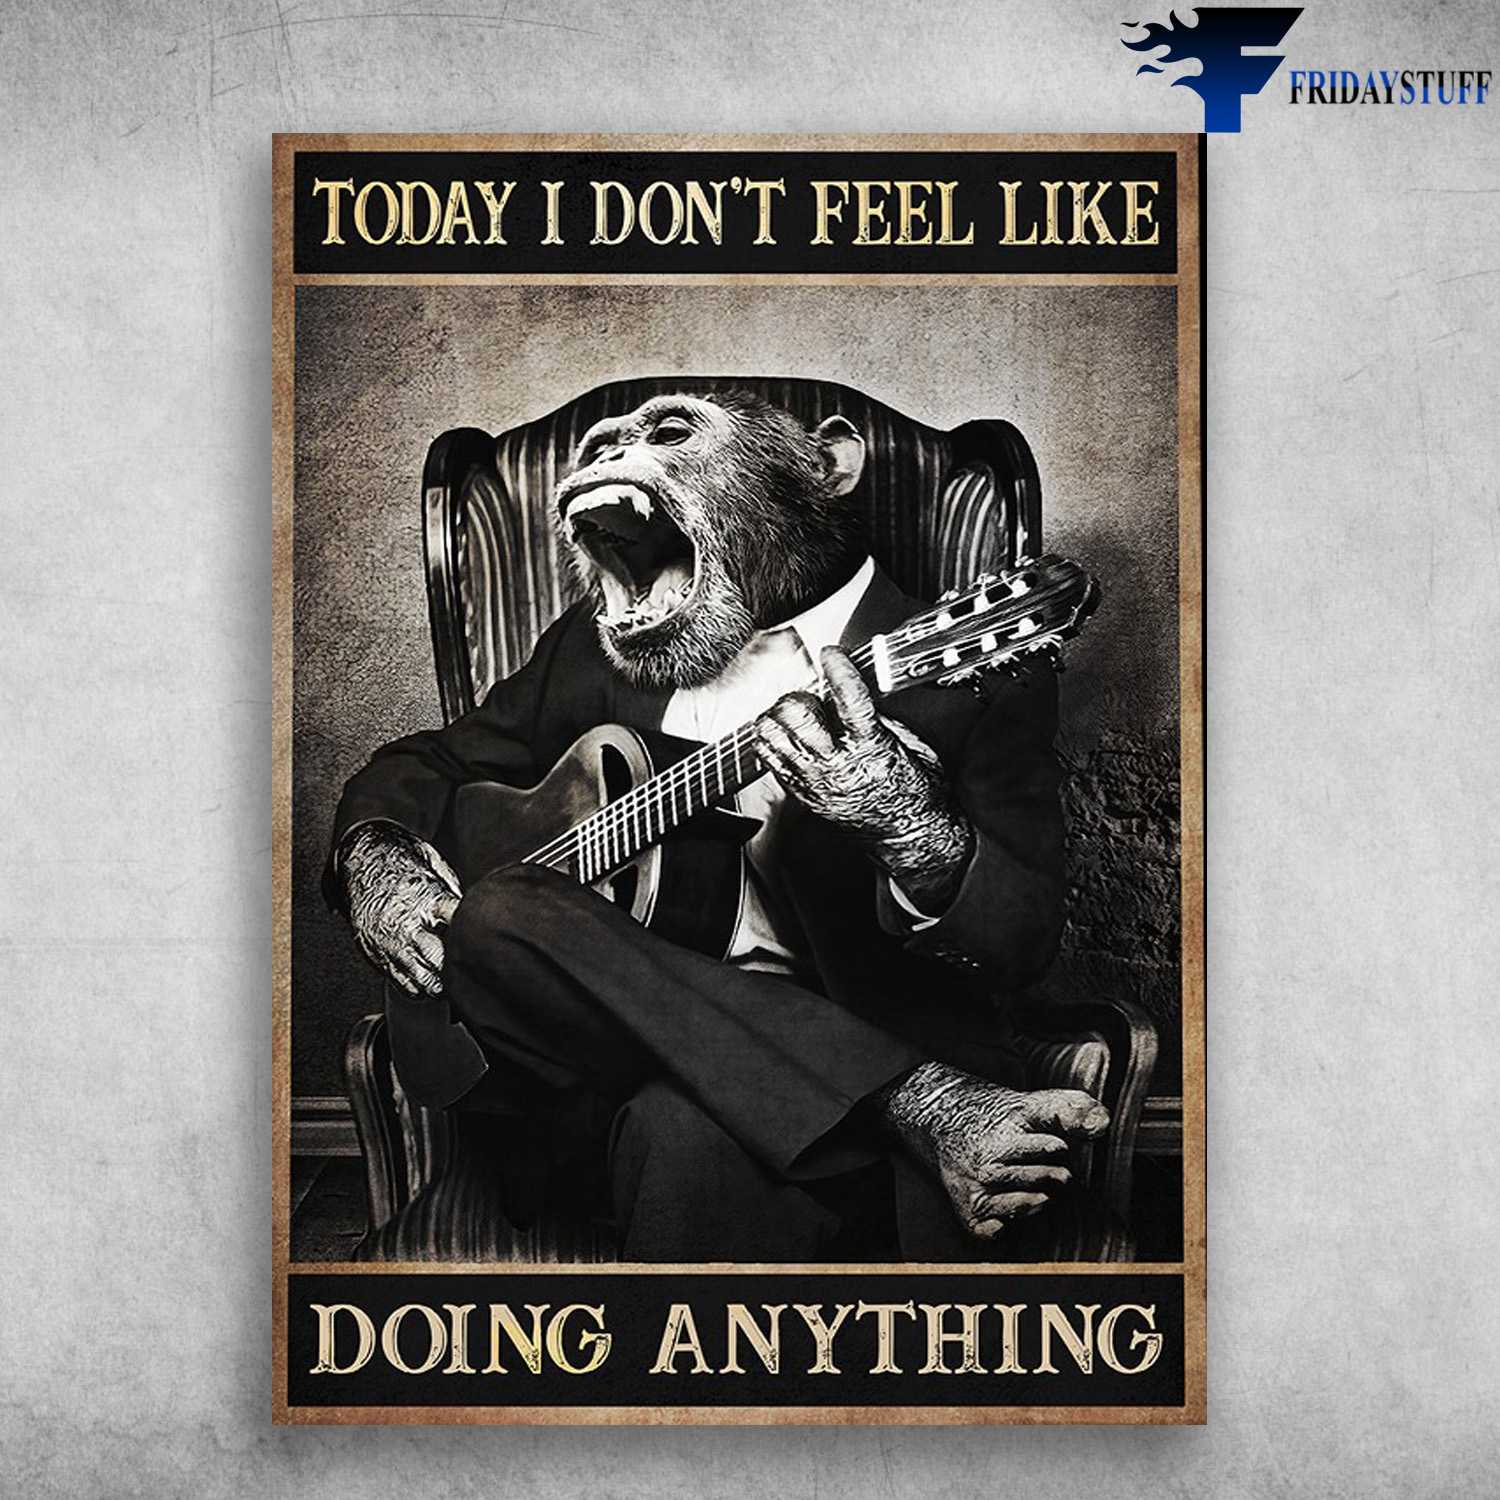 Monkey Guitar - Today I Don't Feel Like, Doing Anything